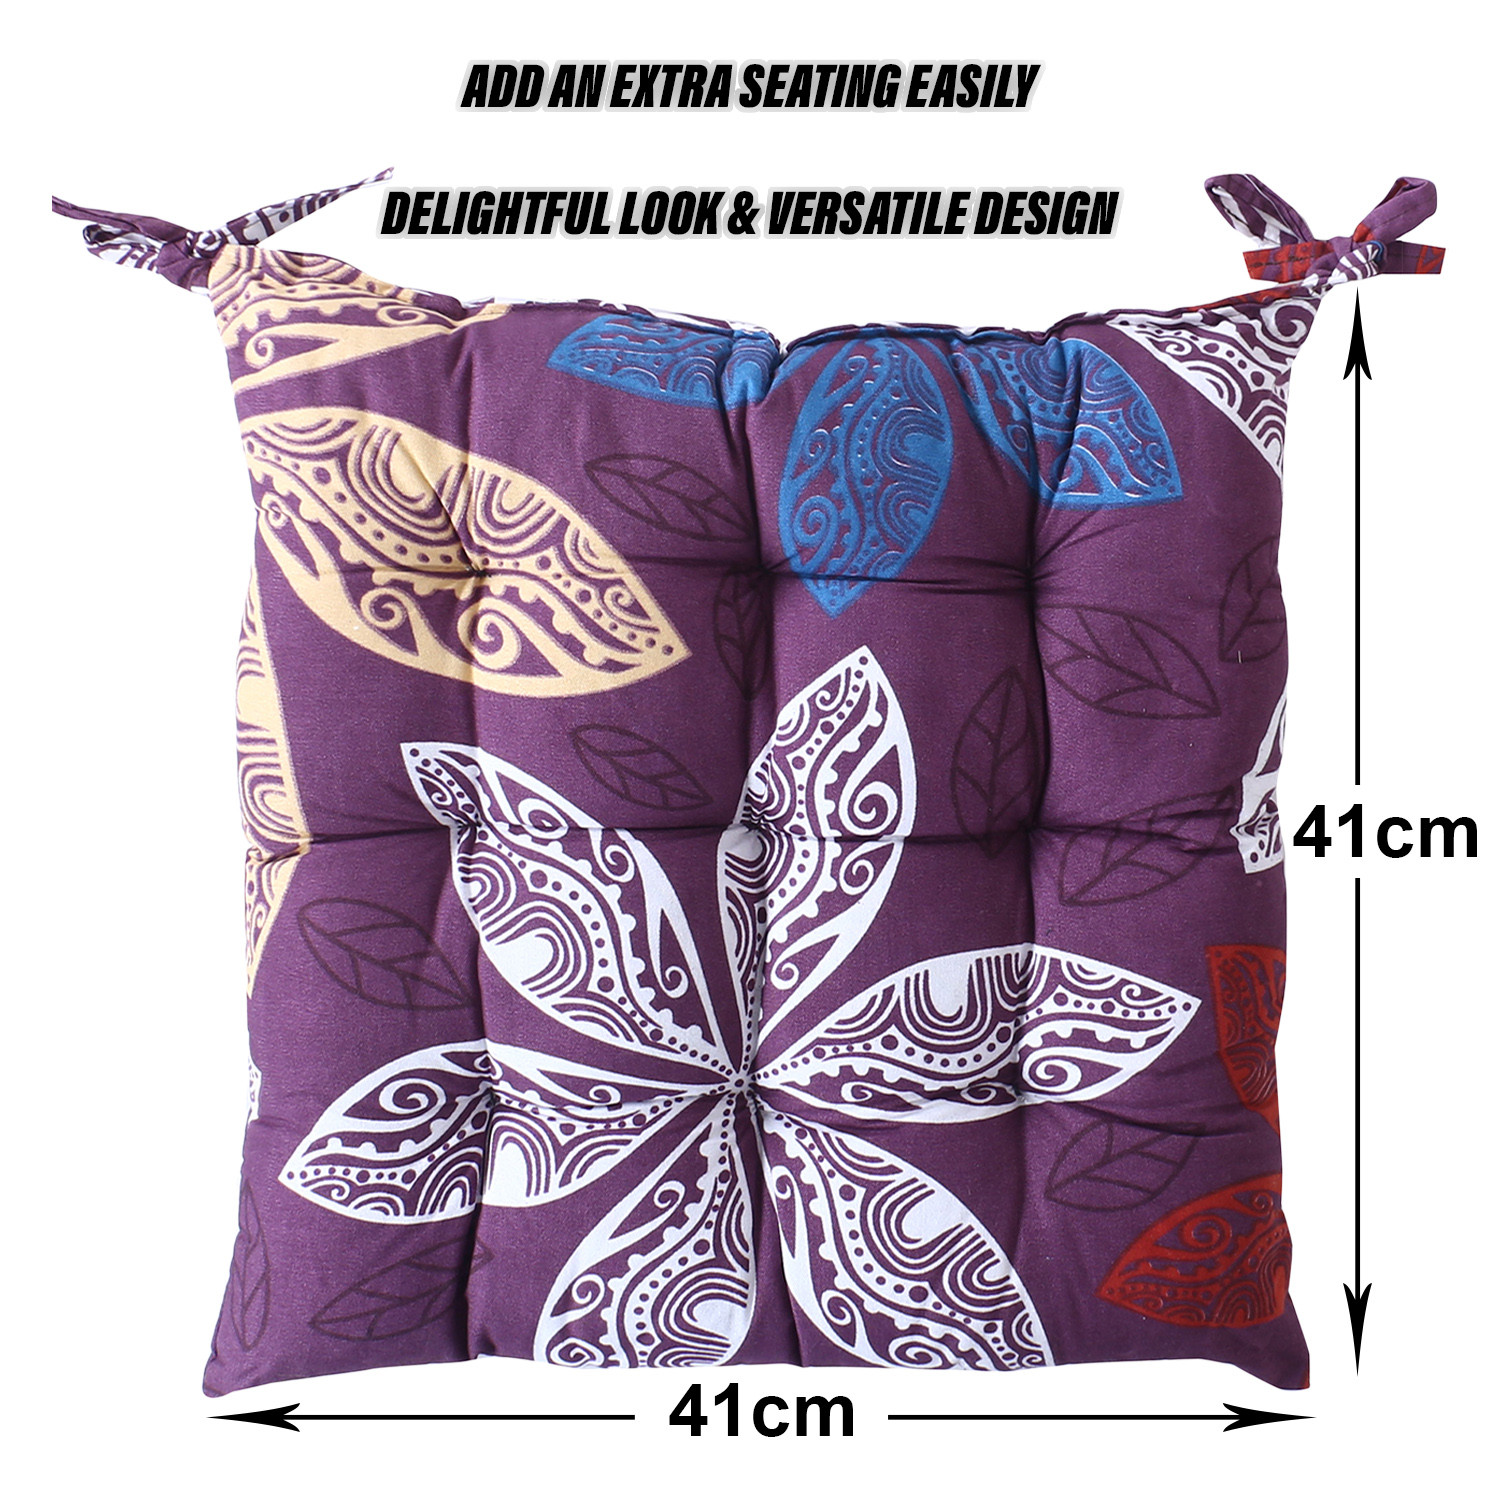 Kuber Industries Chair pad | Glance Cotton Square Seat Cushion | Chair pad for Chair | Chair Back Rest Pillow | Flower Chair pad for Meditation | Yoga | Living Room | Purple